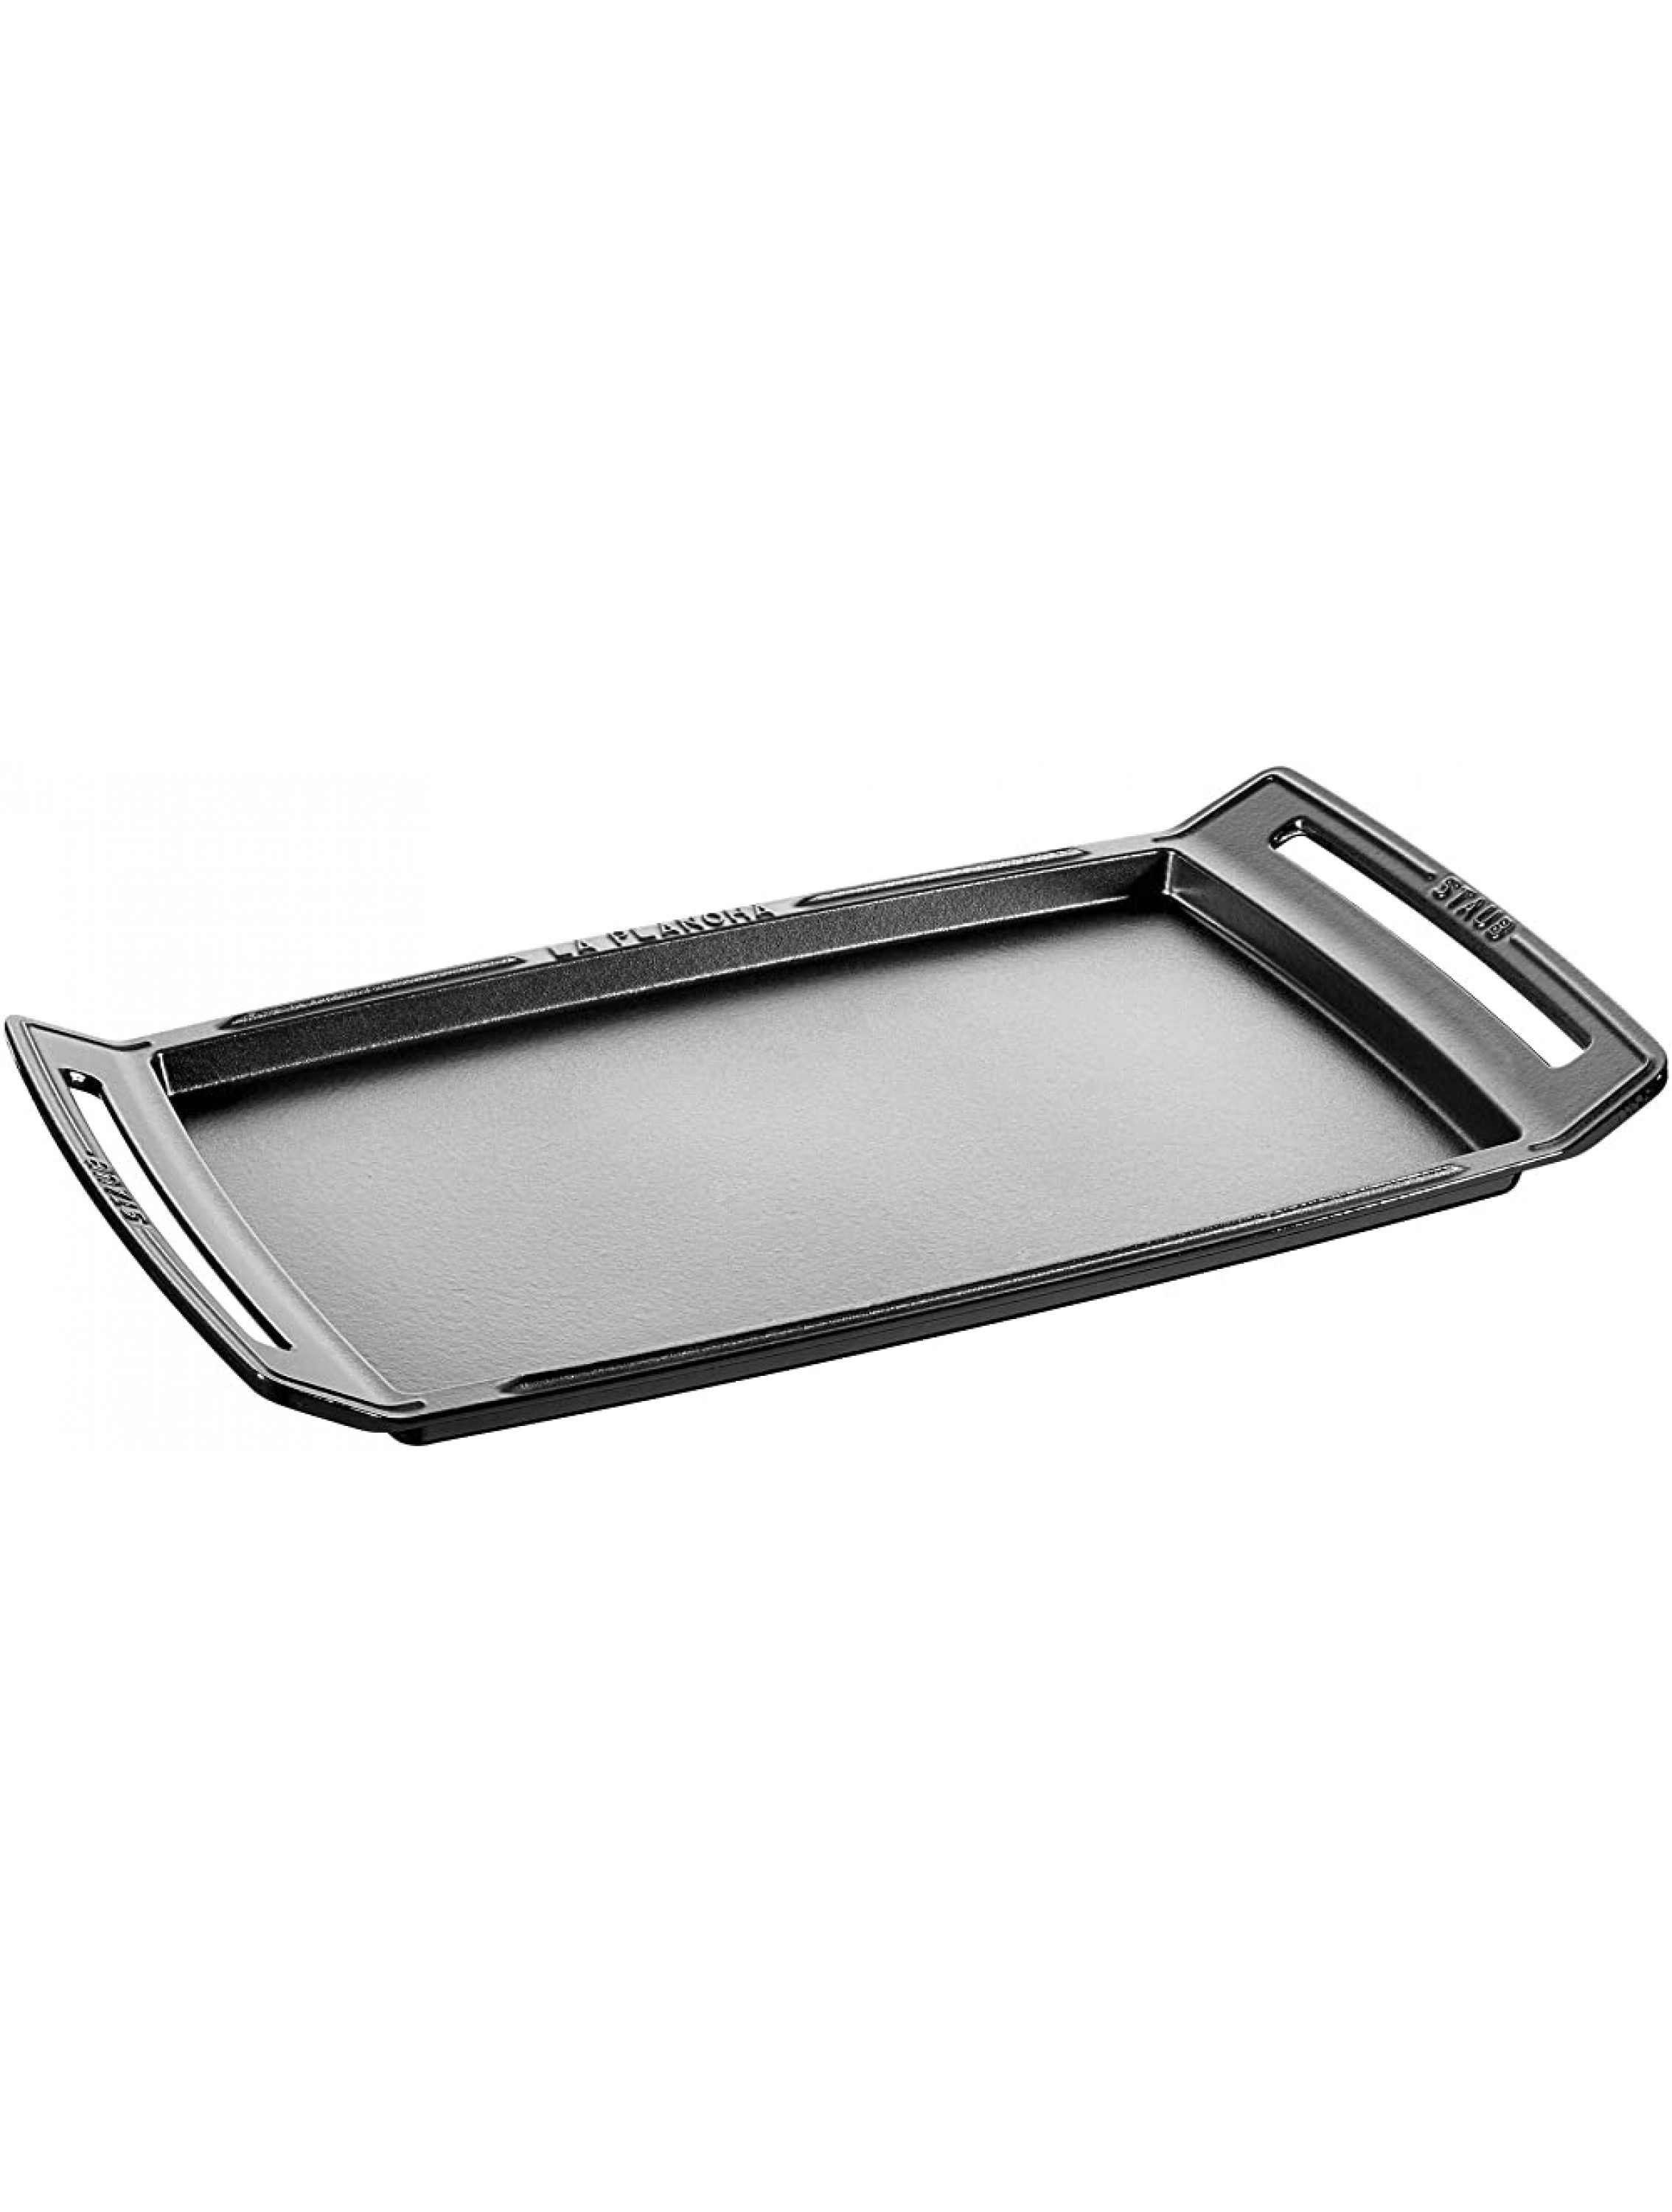 Staub Cast Iron 18.5 x 9.8-inch Plancha Double Burner Griddle Made in France - BOPBIN7Q2